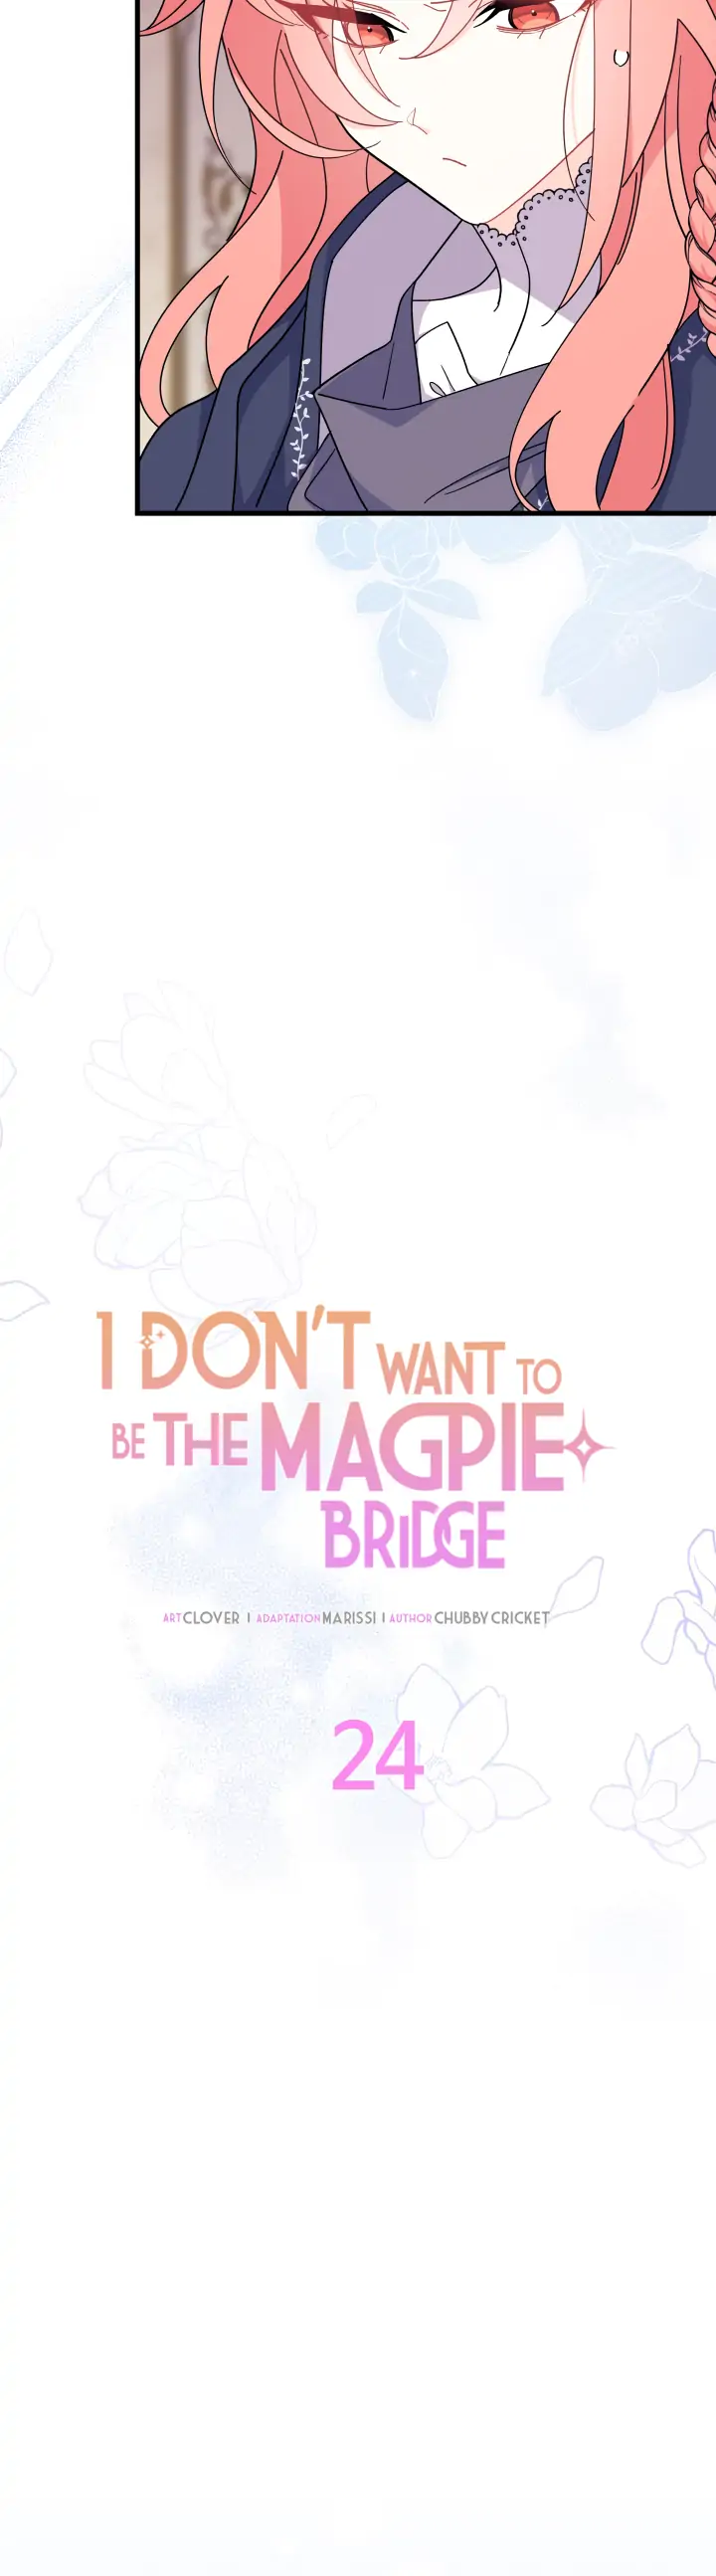 I Don’t Want To Be a Magpie Bridge chapter 24